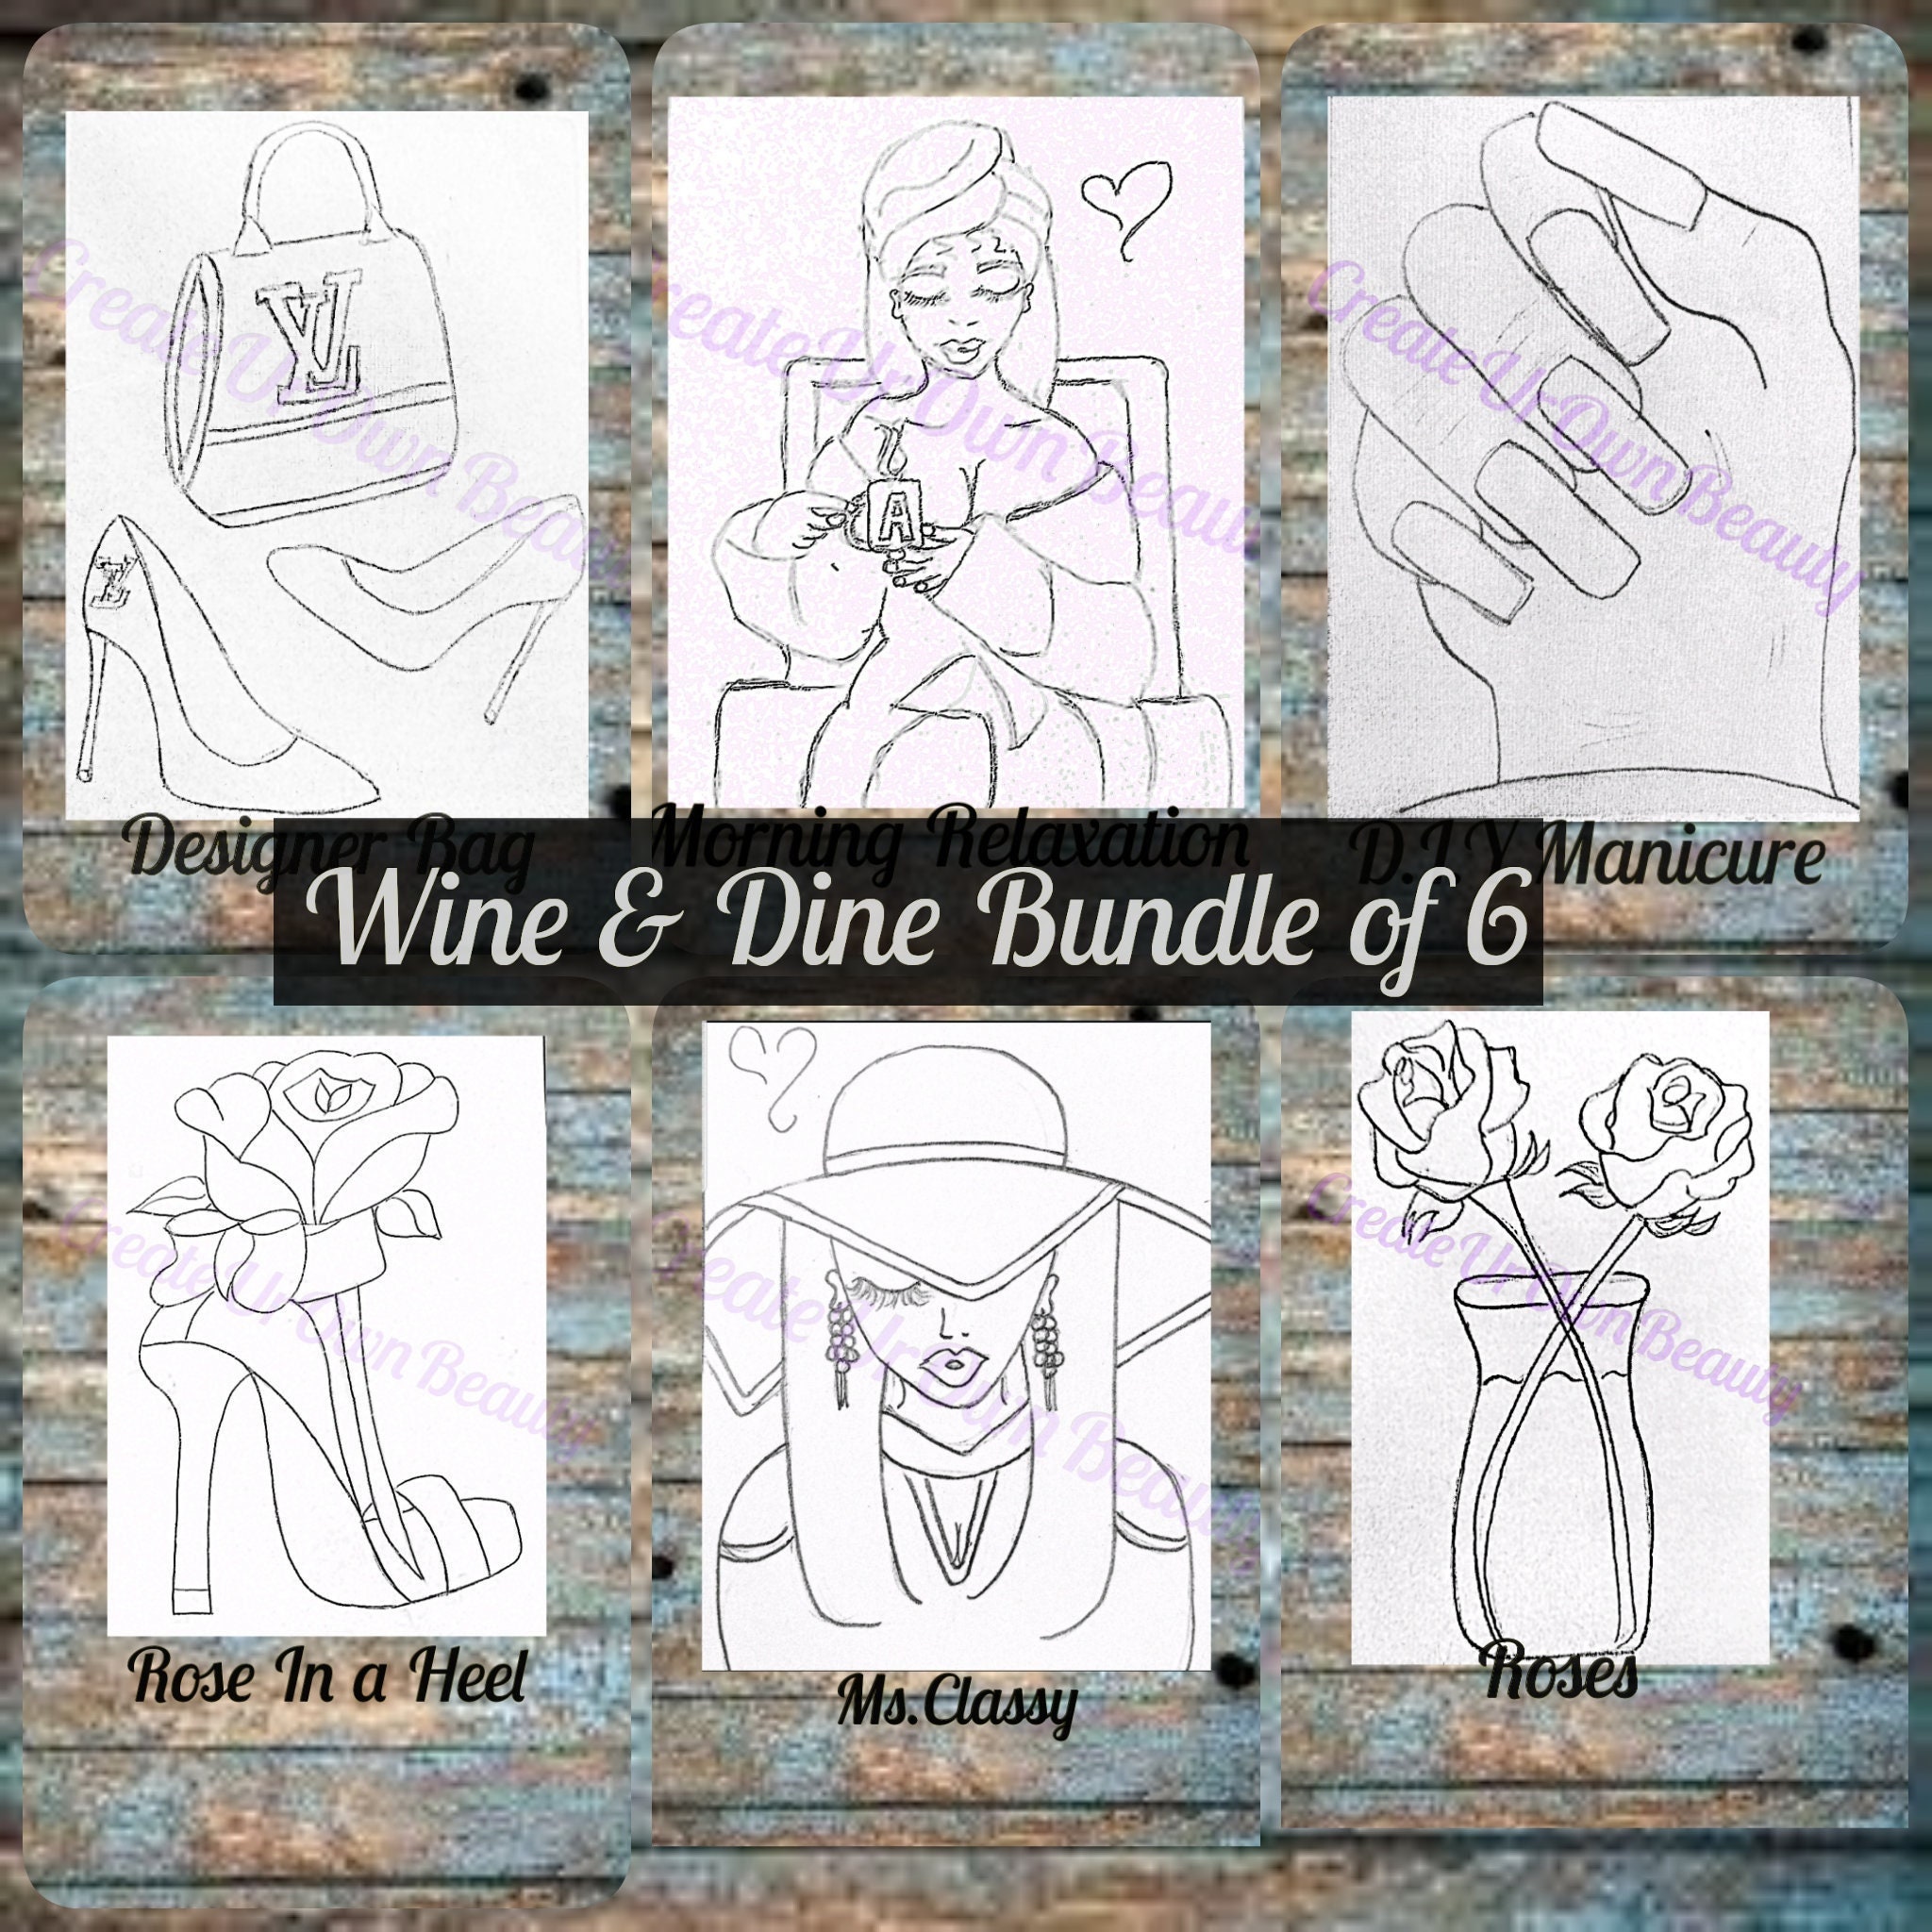 The Purple Toe Picasso Faces Pre Drawn Canvas Painting Kit - 12”X16” (2 Pack) Sip and Paint Kit for Adult’s - Pre-Drawn Canvas Bundle Party Pack 